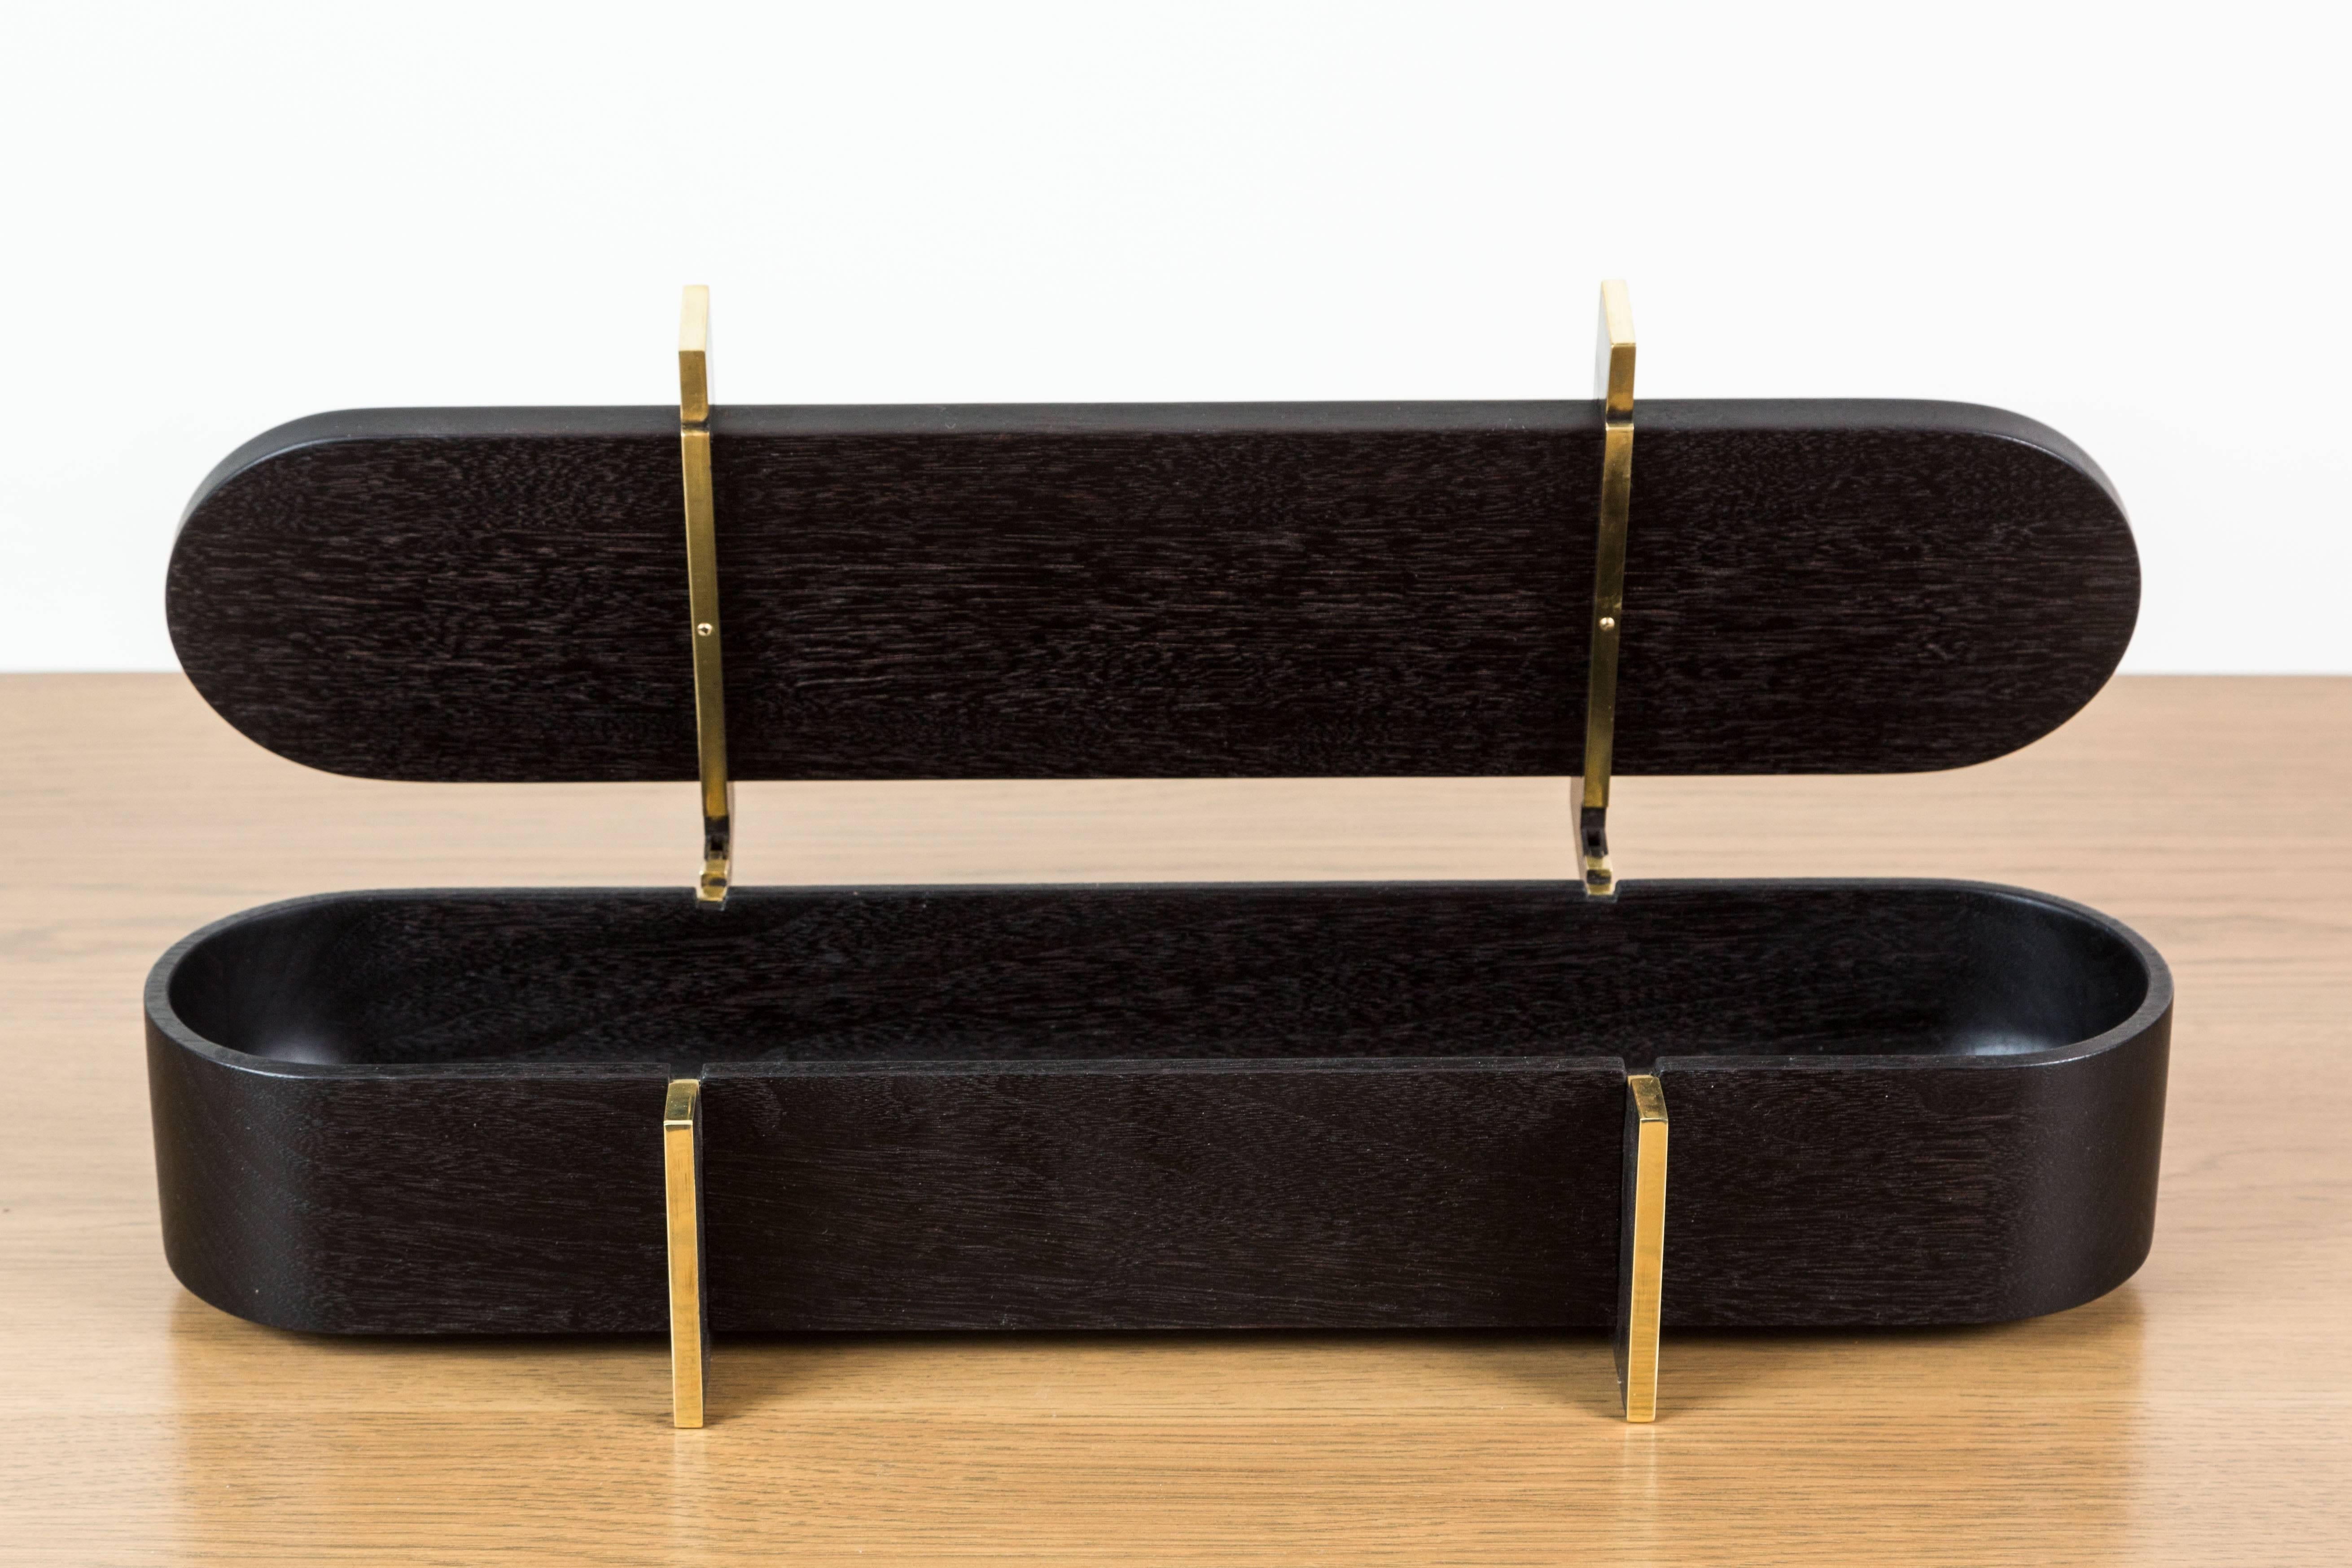 Ebonized Walnut and Brass Lidded Box by Artist Vincent Pocsik in collaboration with Lawson-Fenning. Features a sculptural carved wood interior. Made of natural materials, this decorative object can be accessorized on table top, book shelf, or desk